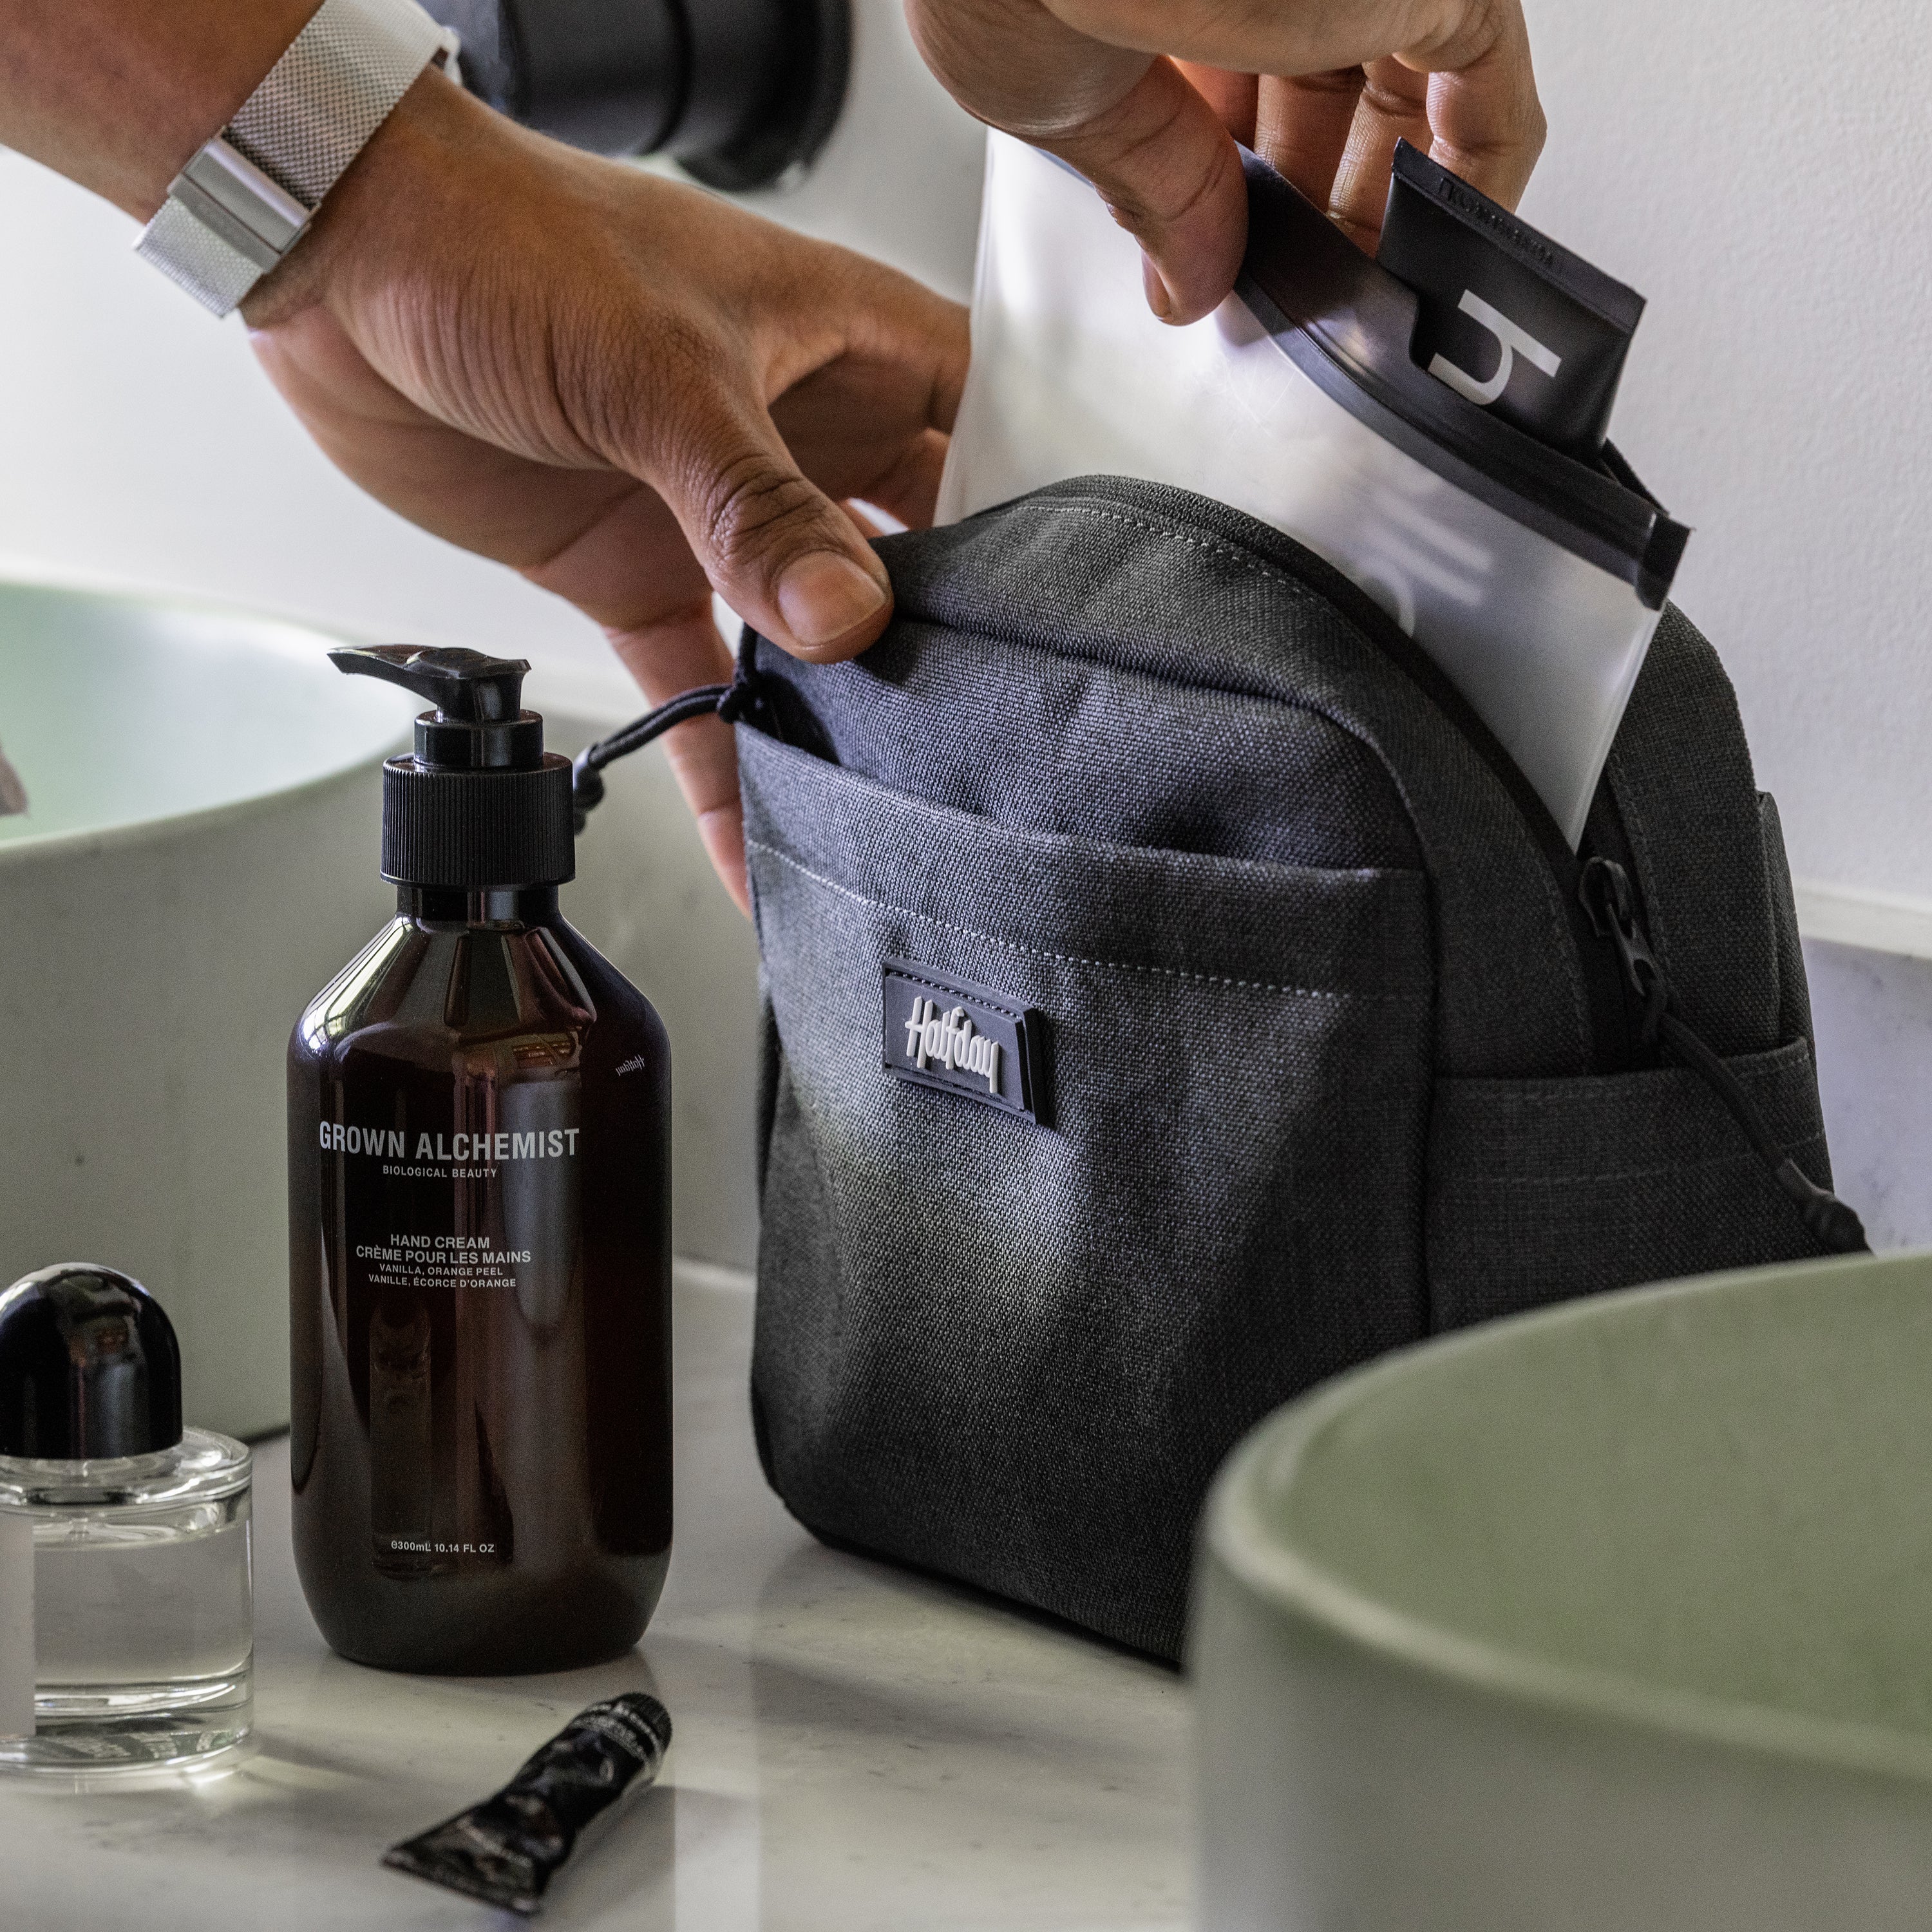 The Sidecar Toiletry Kit - Color Shadow